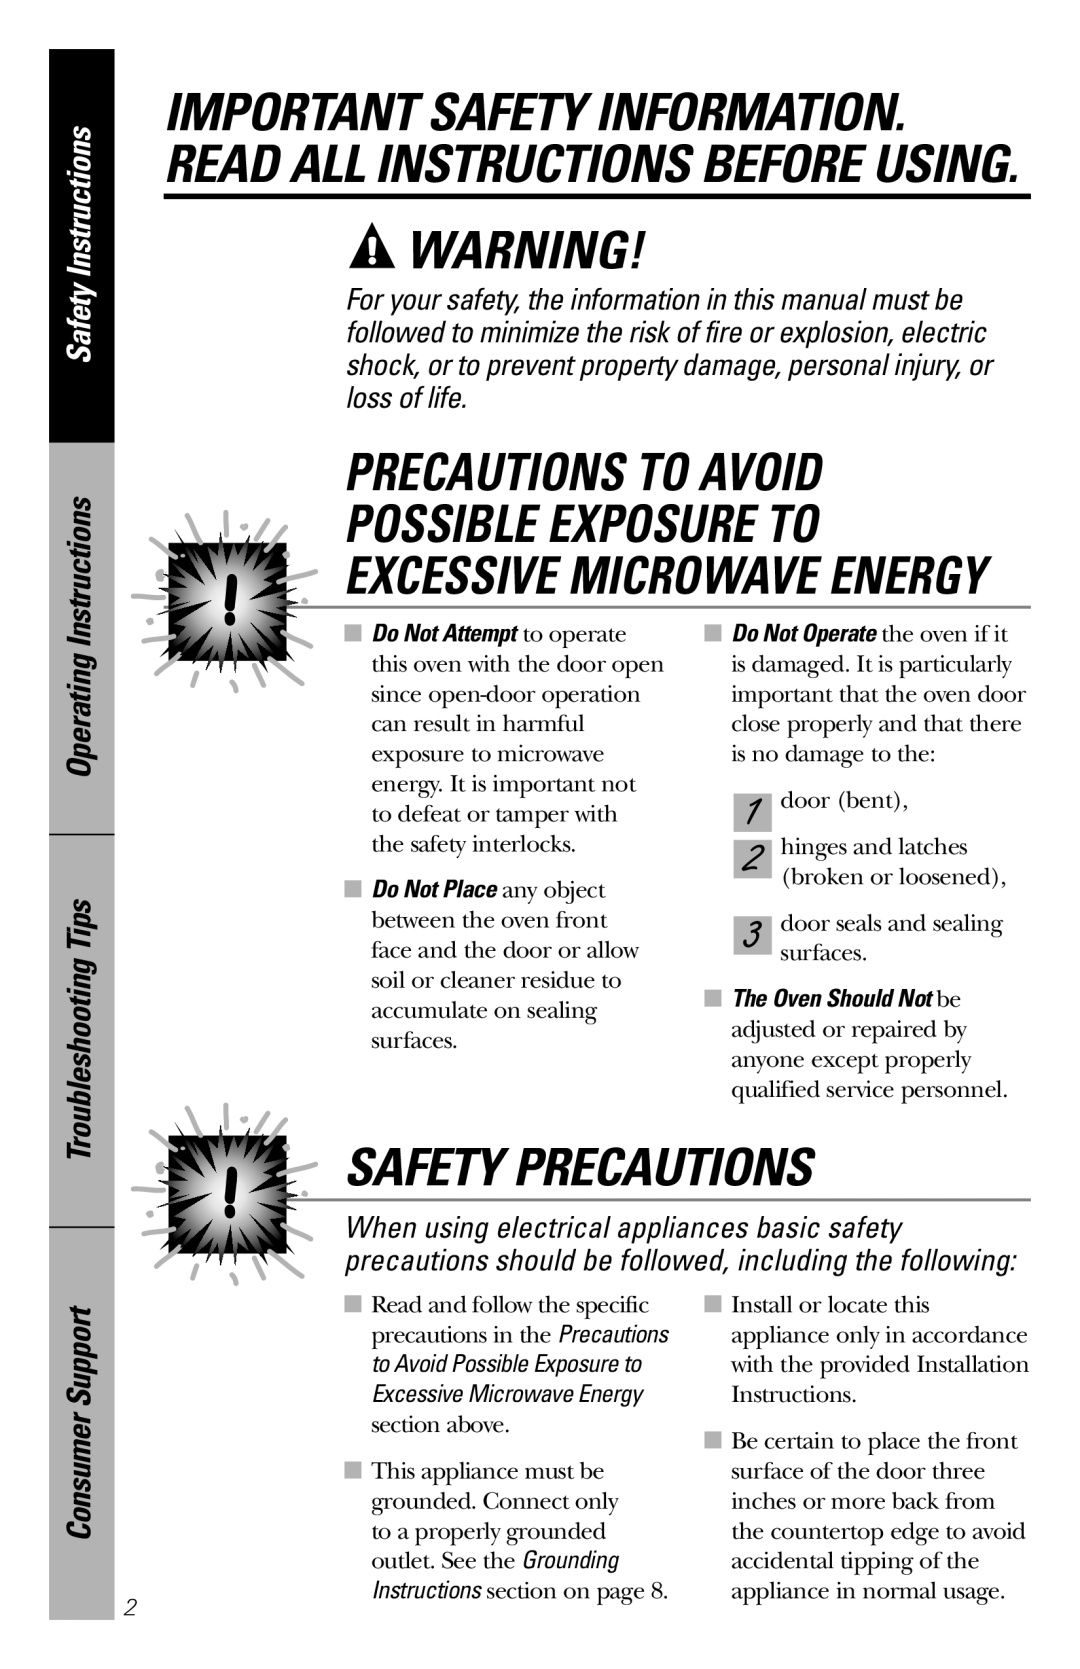 GE PEM31 Precautions To Avoid Possible Exposure To, Safety Precautions, Excessive Microwave Energy, Safety Instructions 